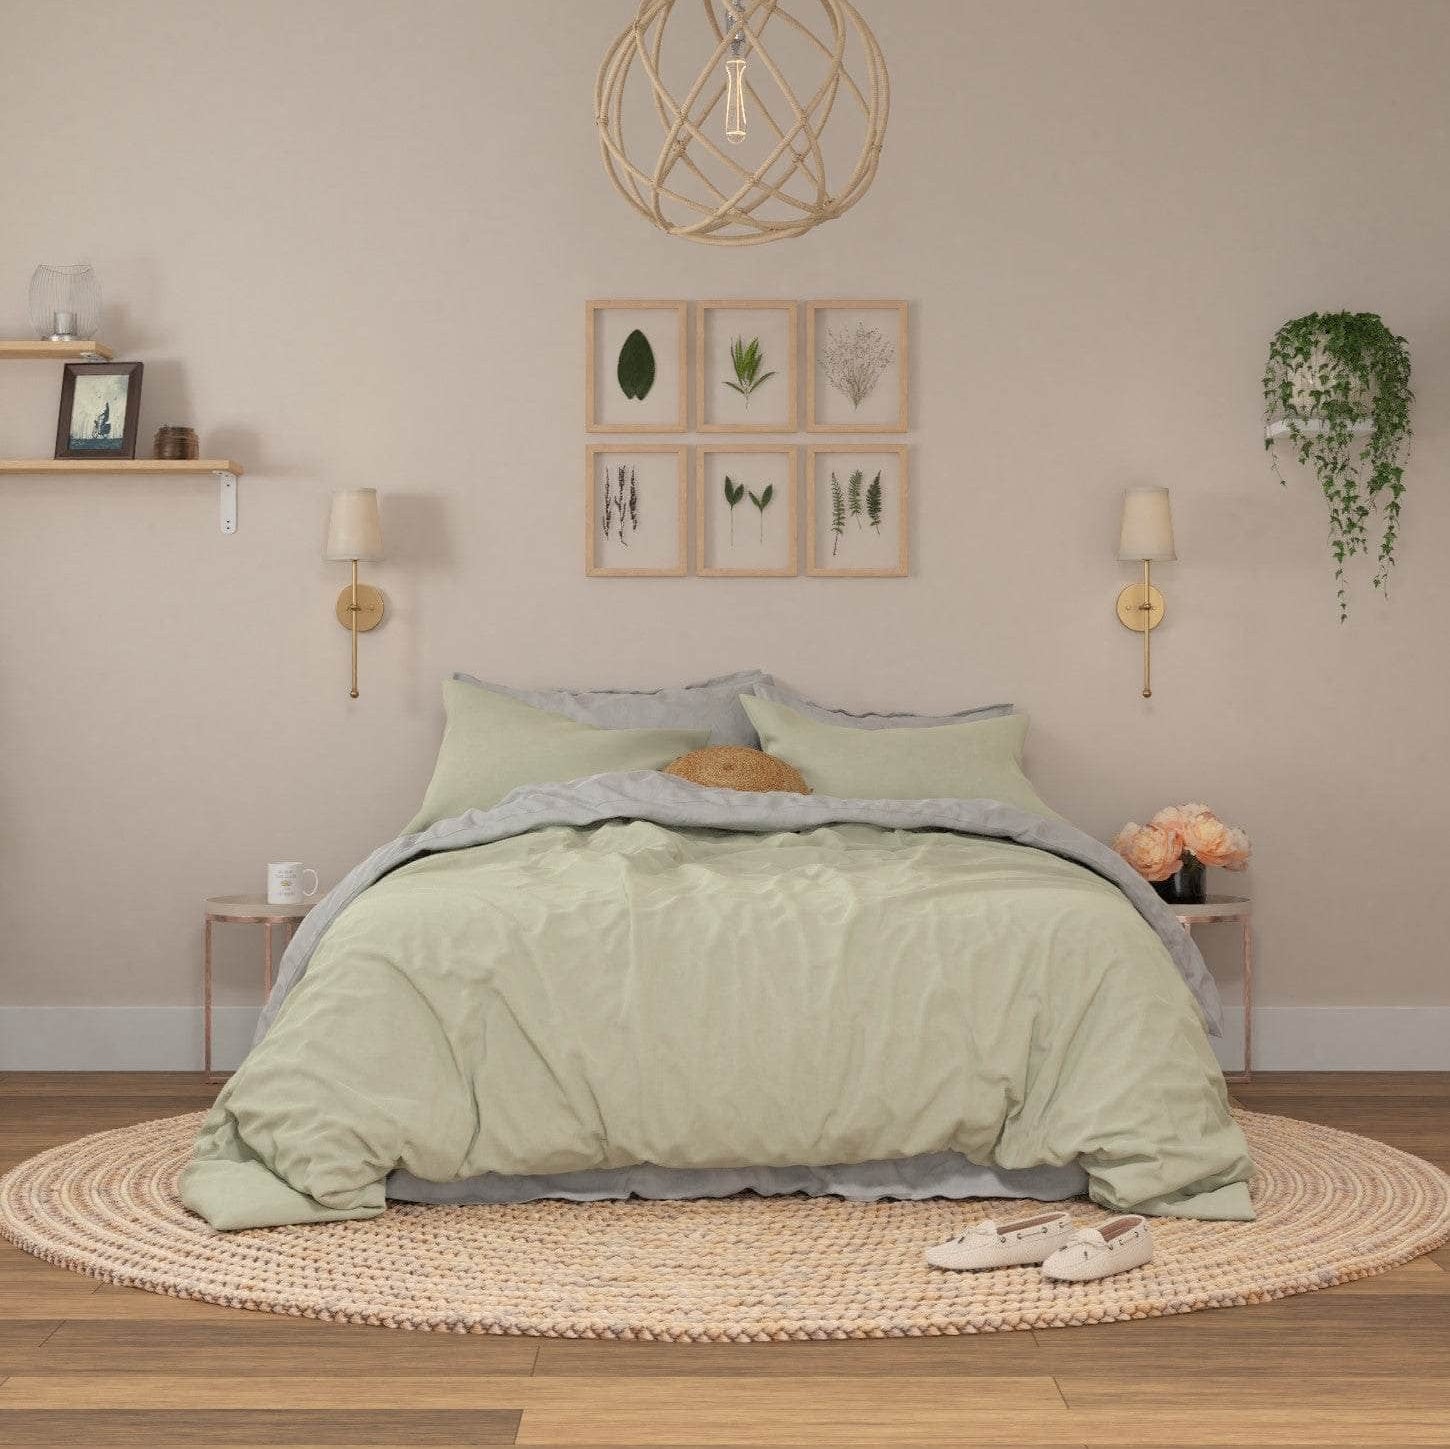 Bed featuring Linen Duvet Cover and Pillowcases in Seafoam with Linen Sheet Set in Mushroom